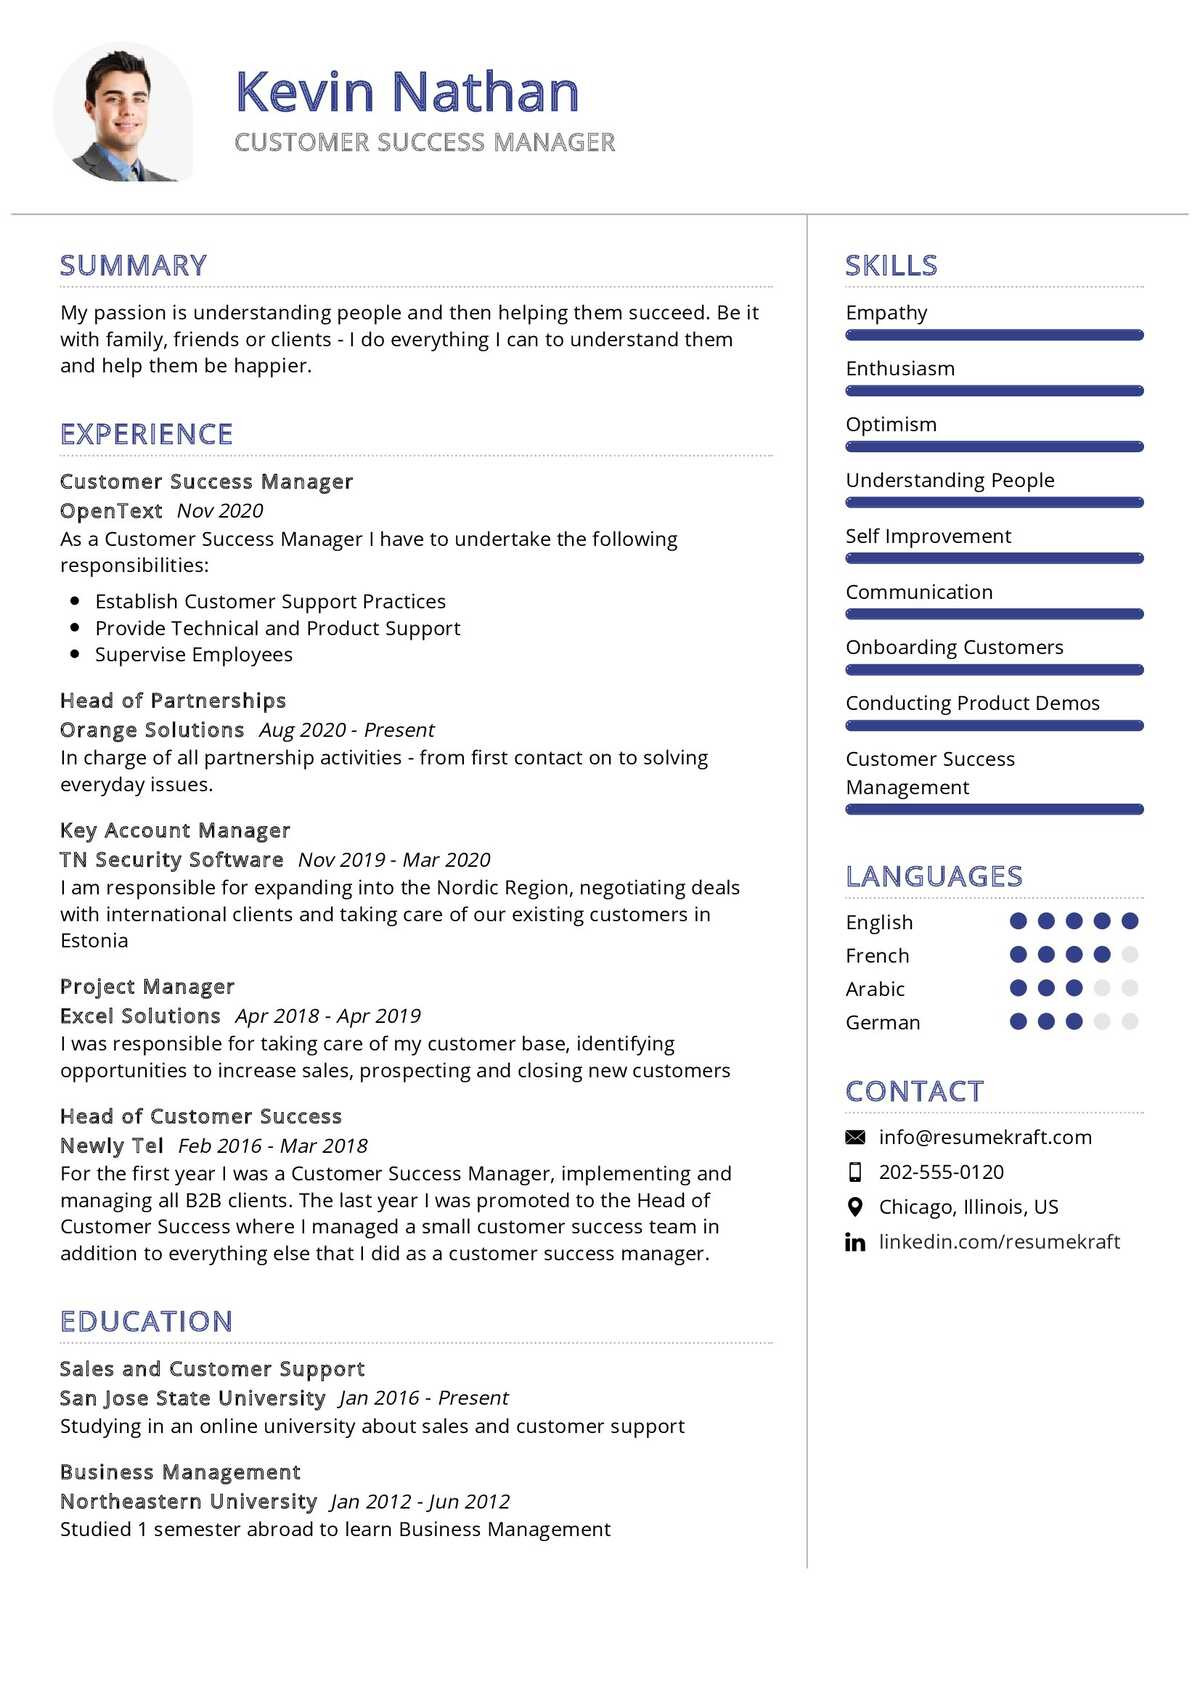 Sample Resume for Customer Success Manager Google Customer Success Manager Resume Sample 2021 Writing Guide …